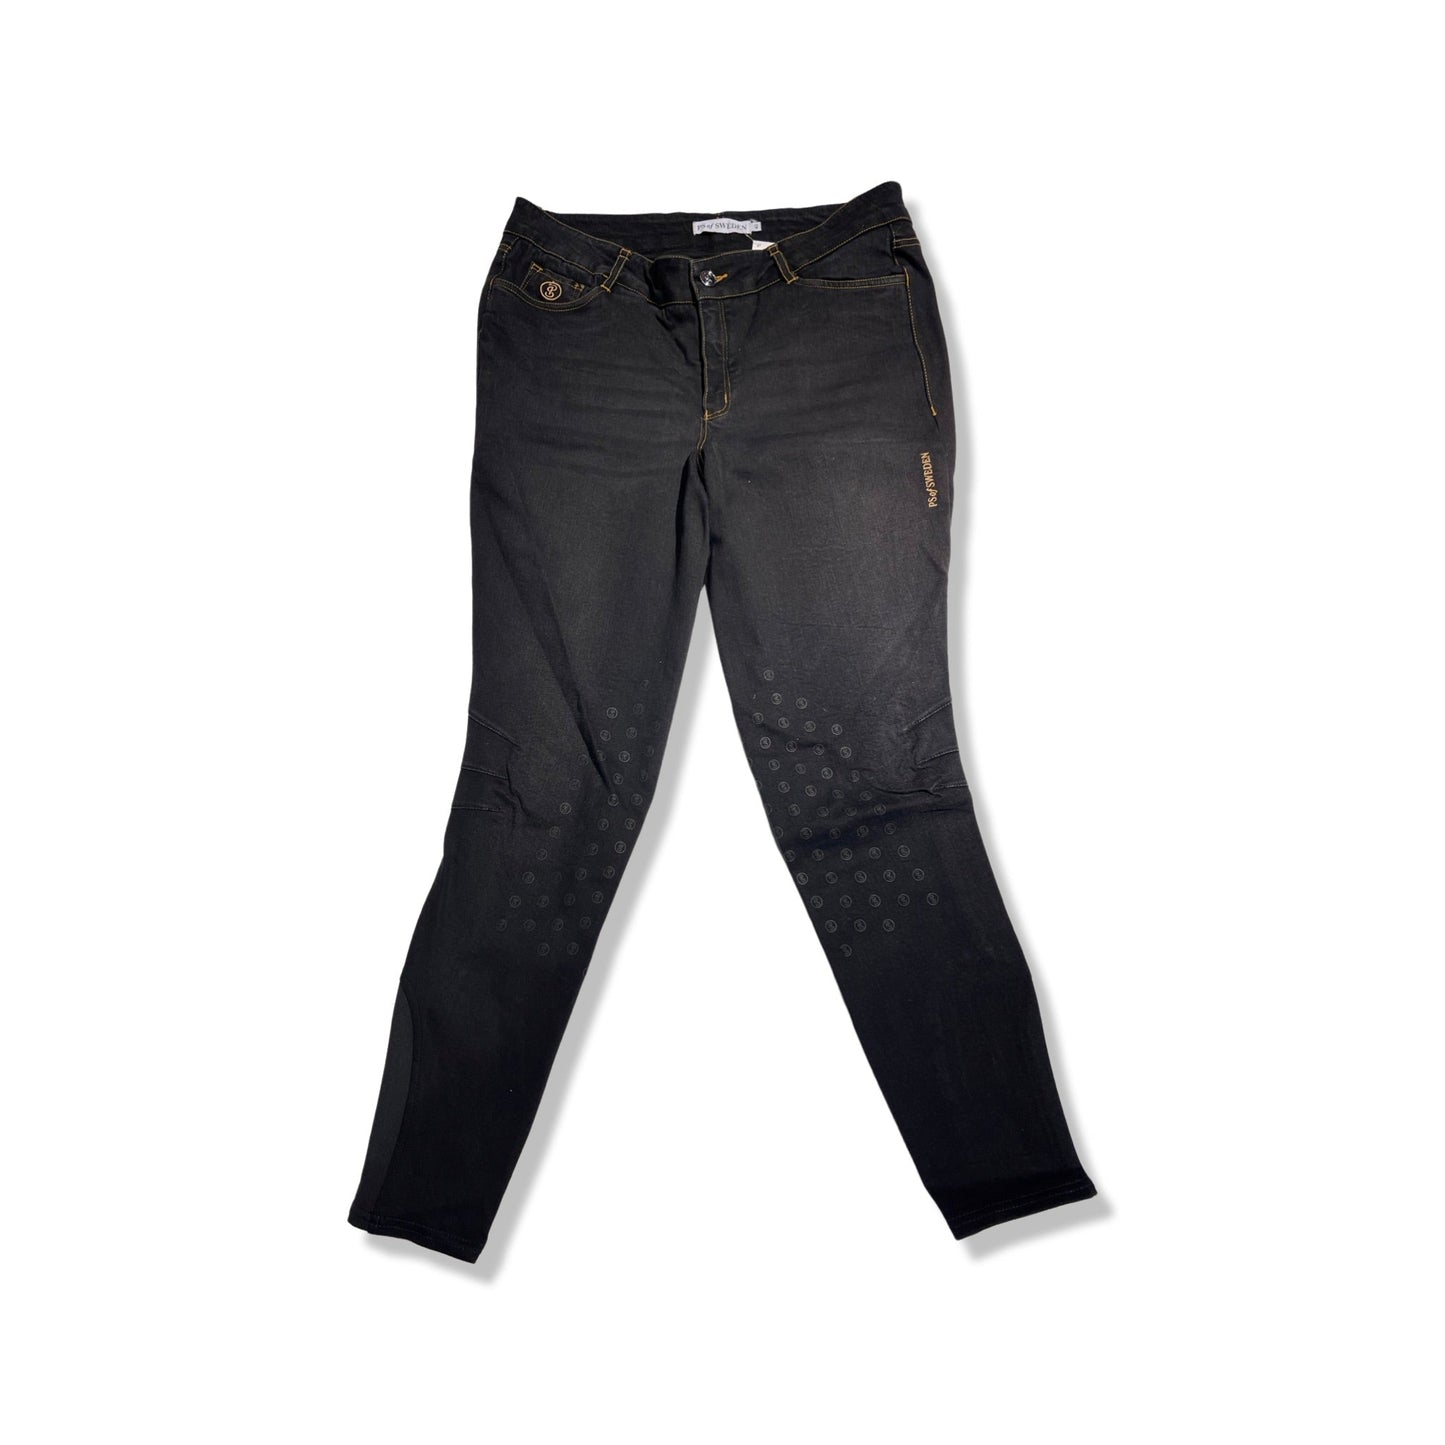 PS of Sweden Maggie Riding Breeches Ladies 44